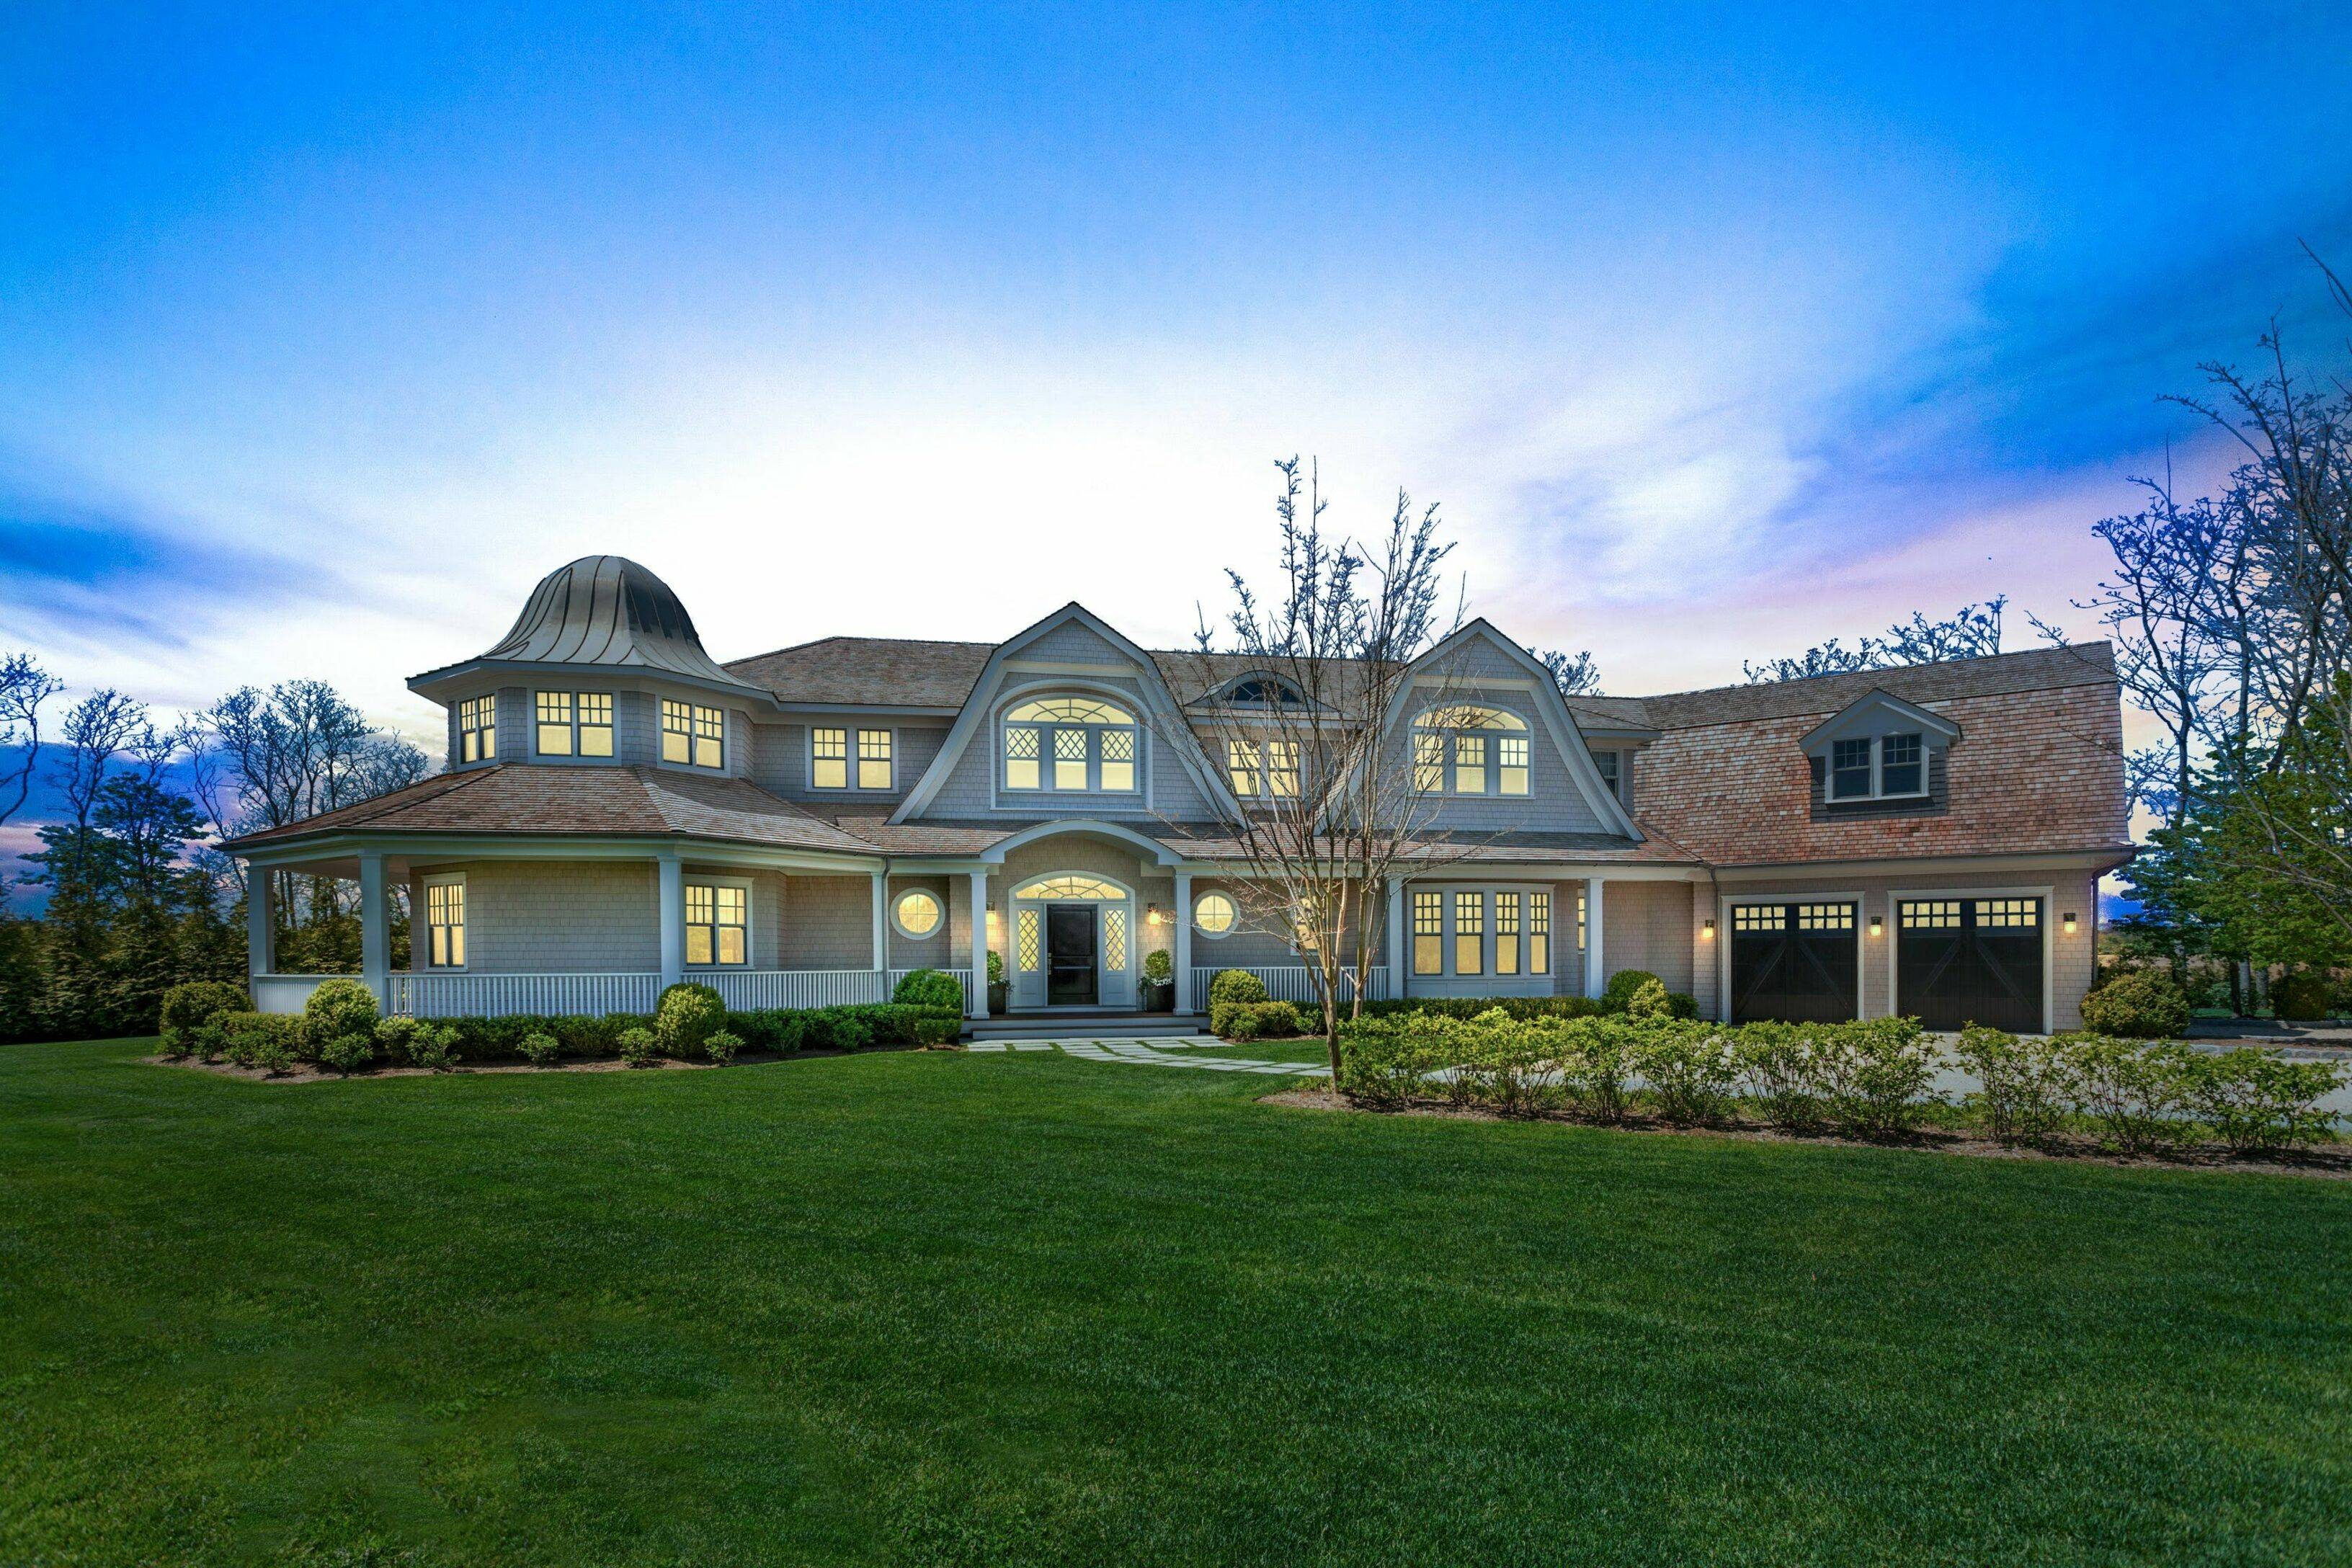 8 Bedroom New Construction Country Estate in Southampton